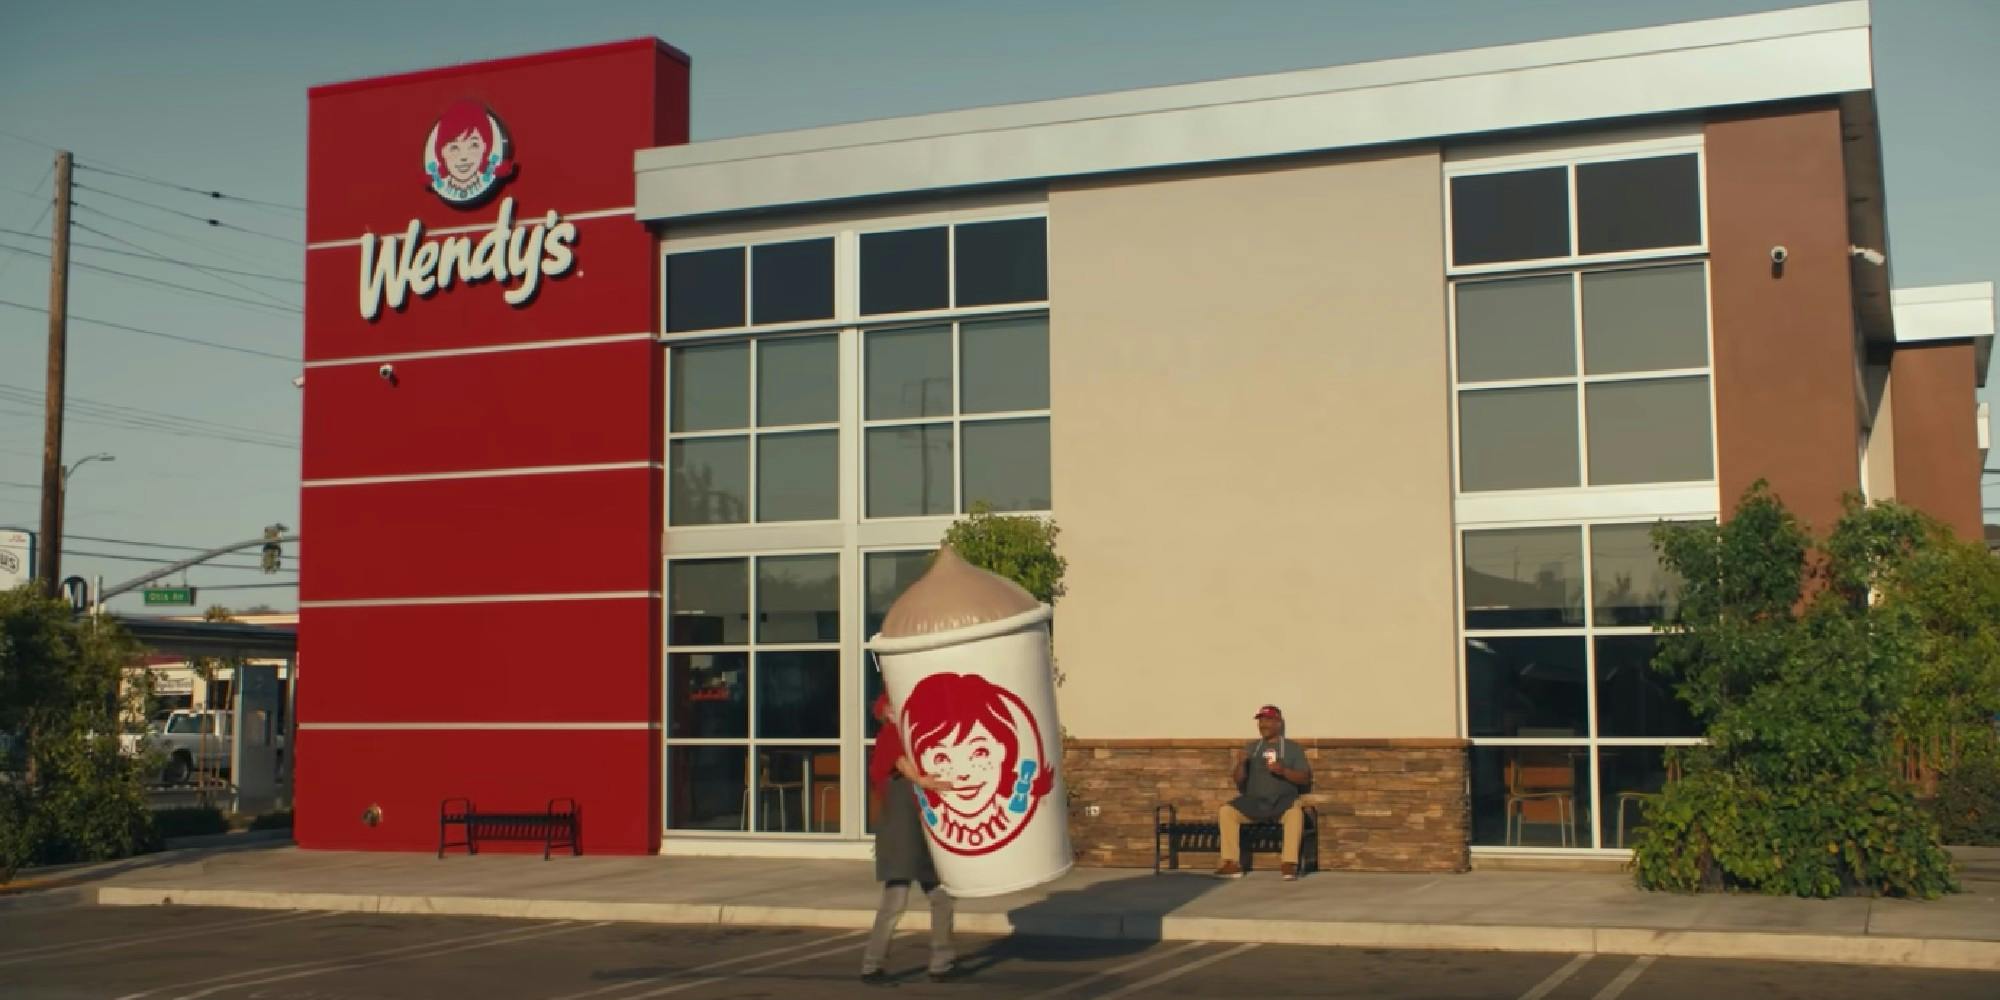 The outside of a building for Wendy's fast food restaurant